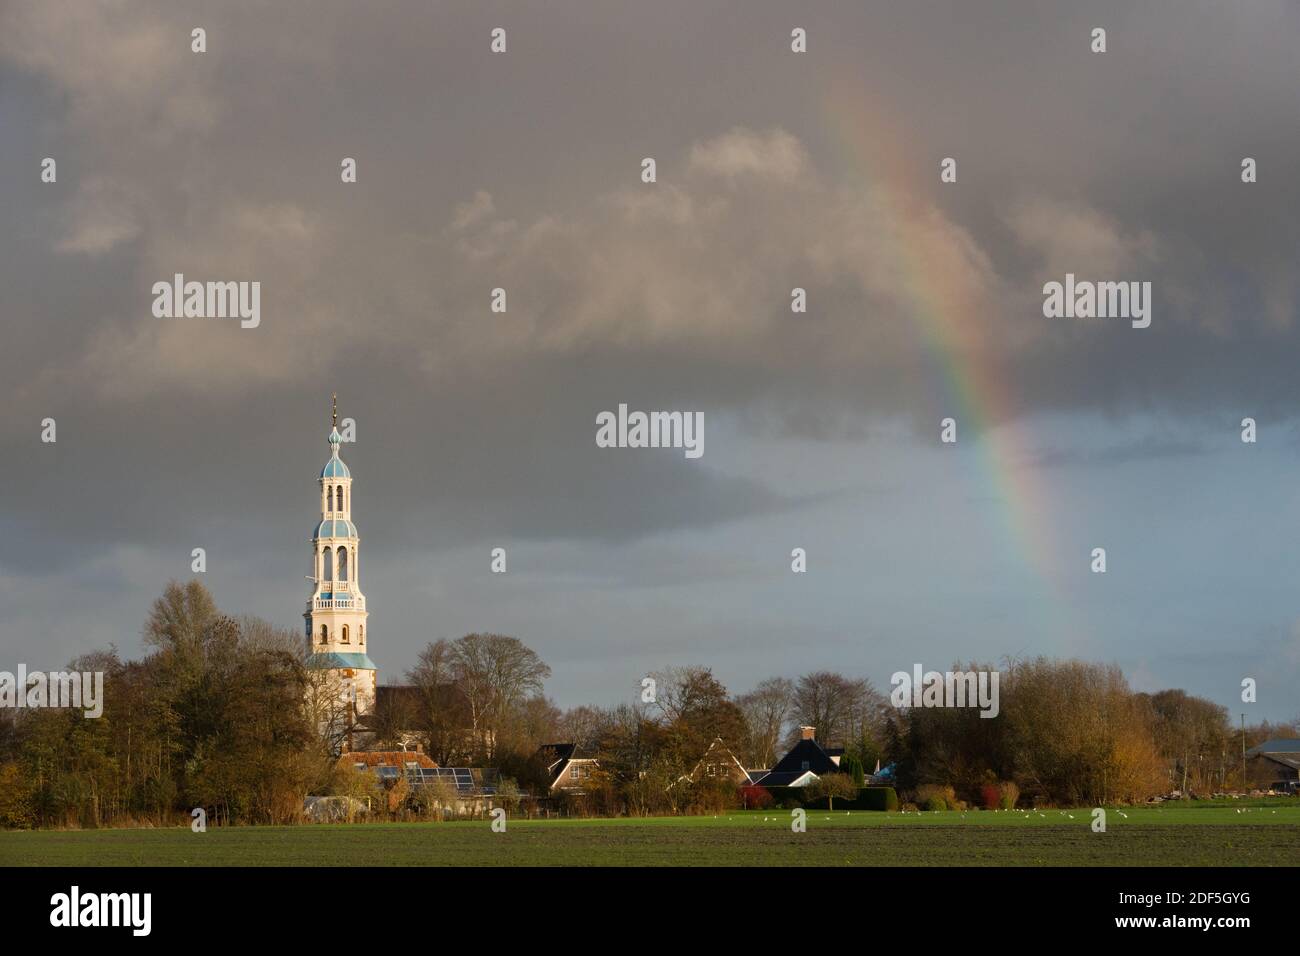 Small rural village with white church tower under dark clouds with rainbow Stock Photo